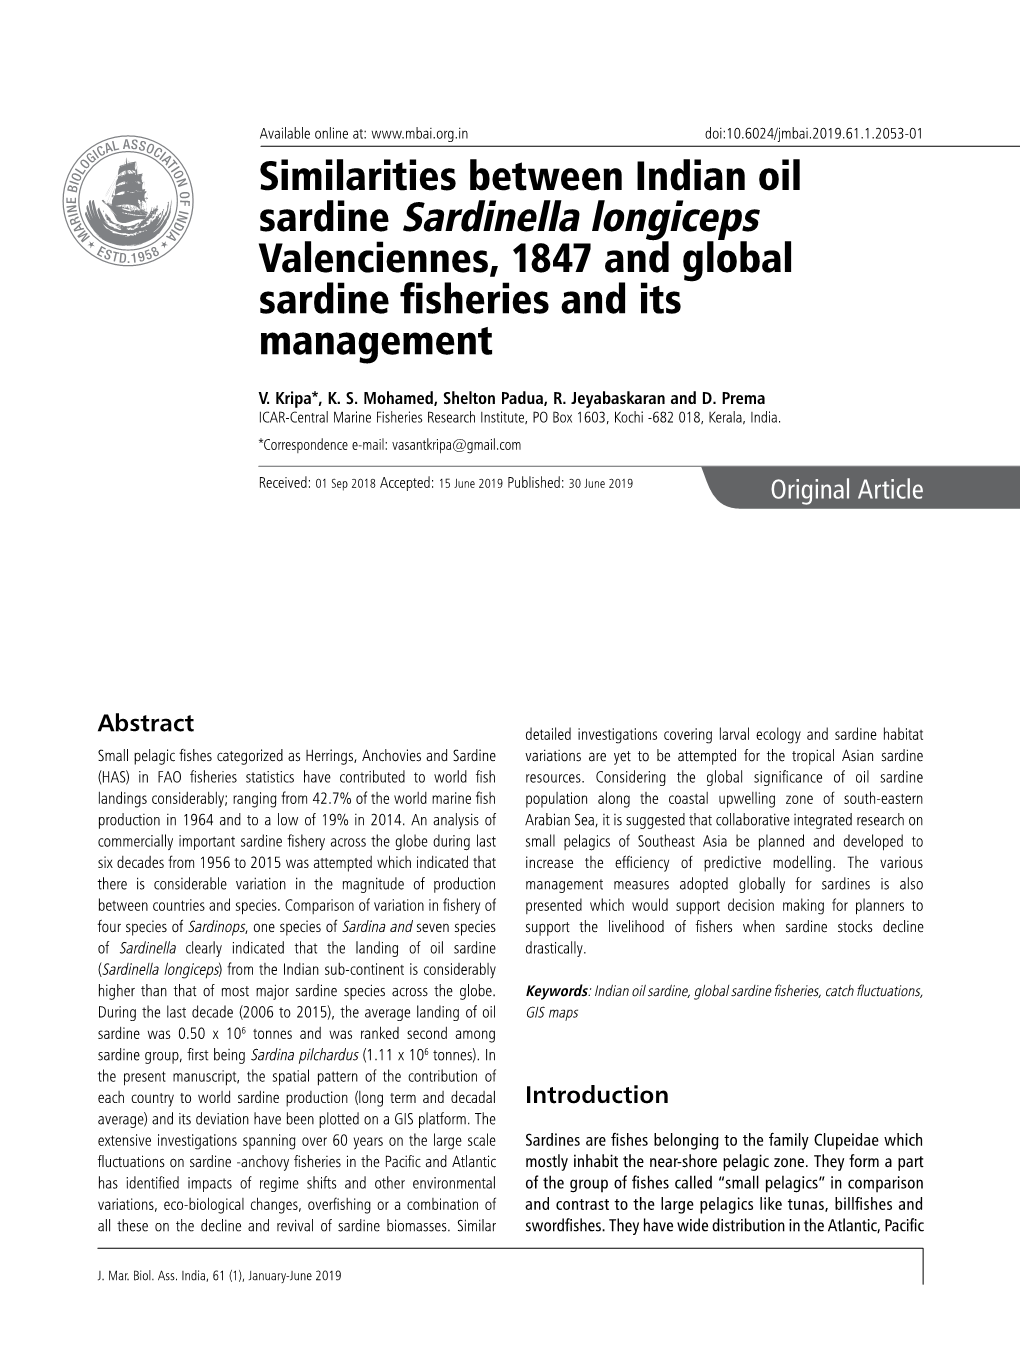 Similarities Between Indian Oil Sardine Sardinella Longiceps Valenciennes, 1847 and Global Sardine Fisheries and Its Management